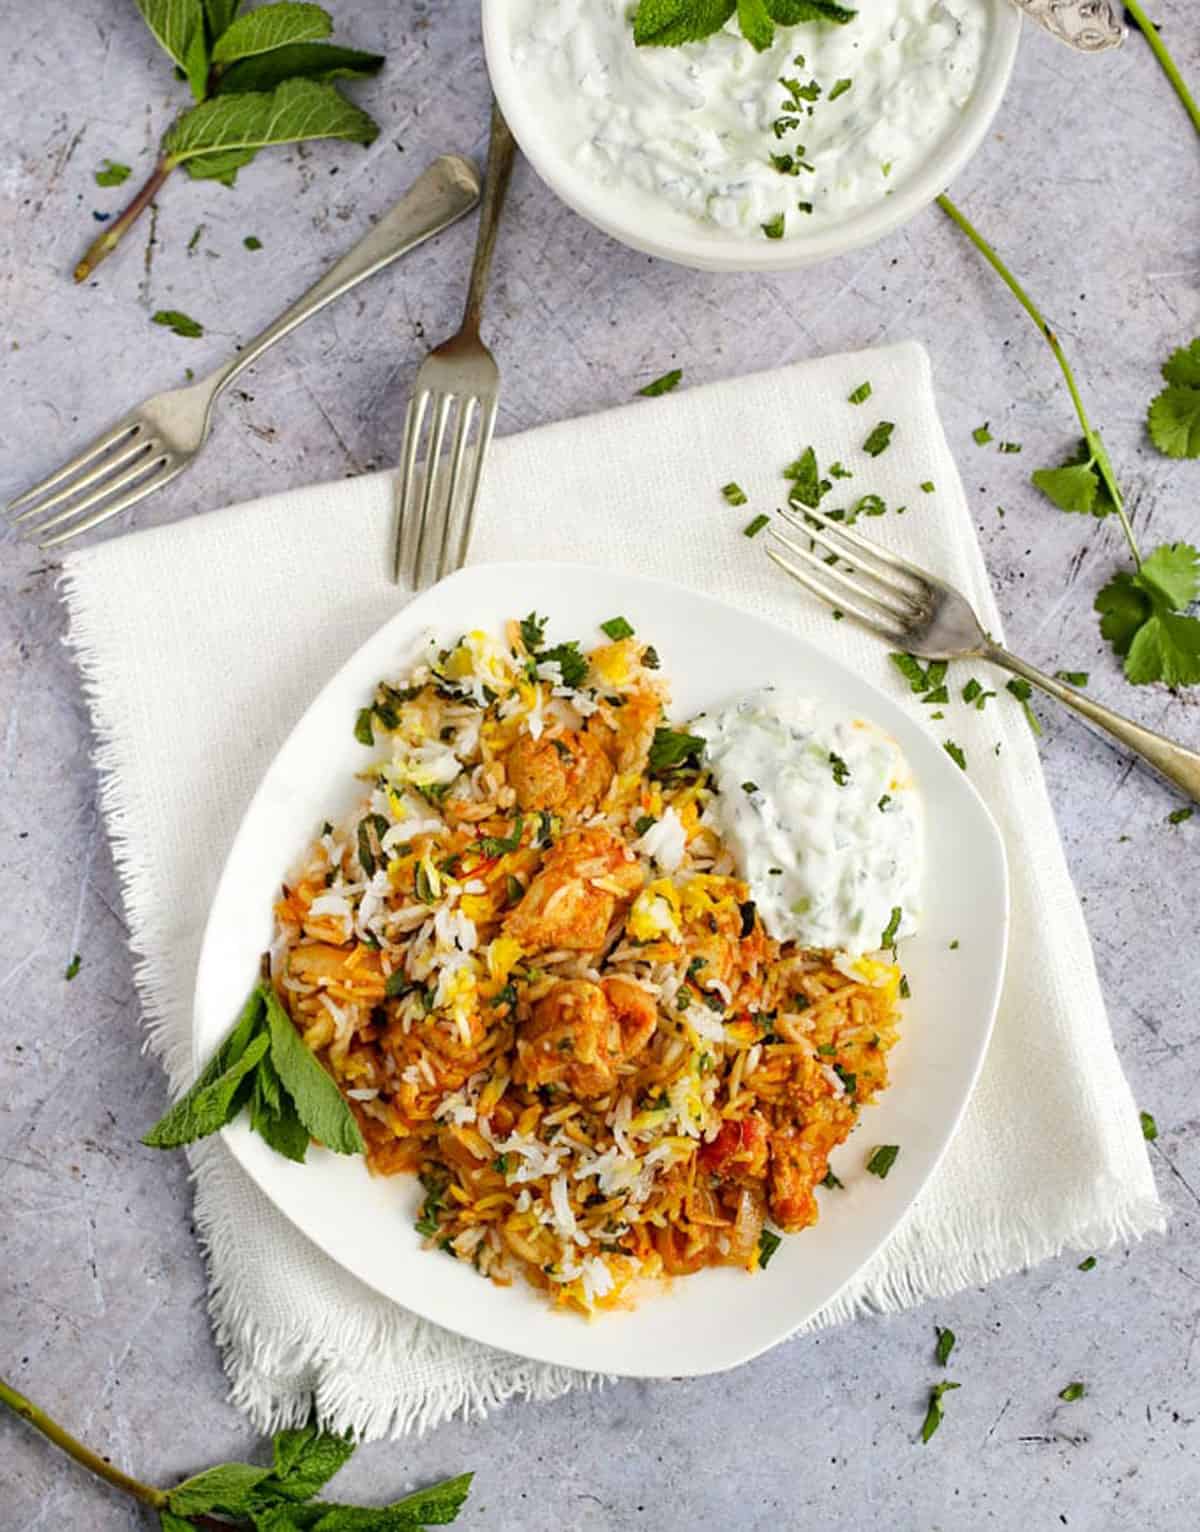 chicken biryani on a plate with forks on the table pointing to it and a bowl of raita next to it.